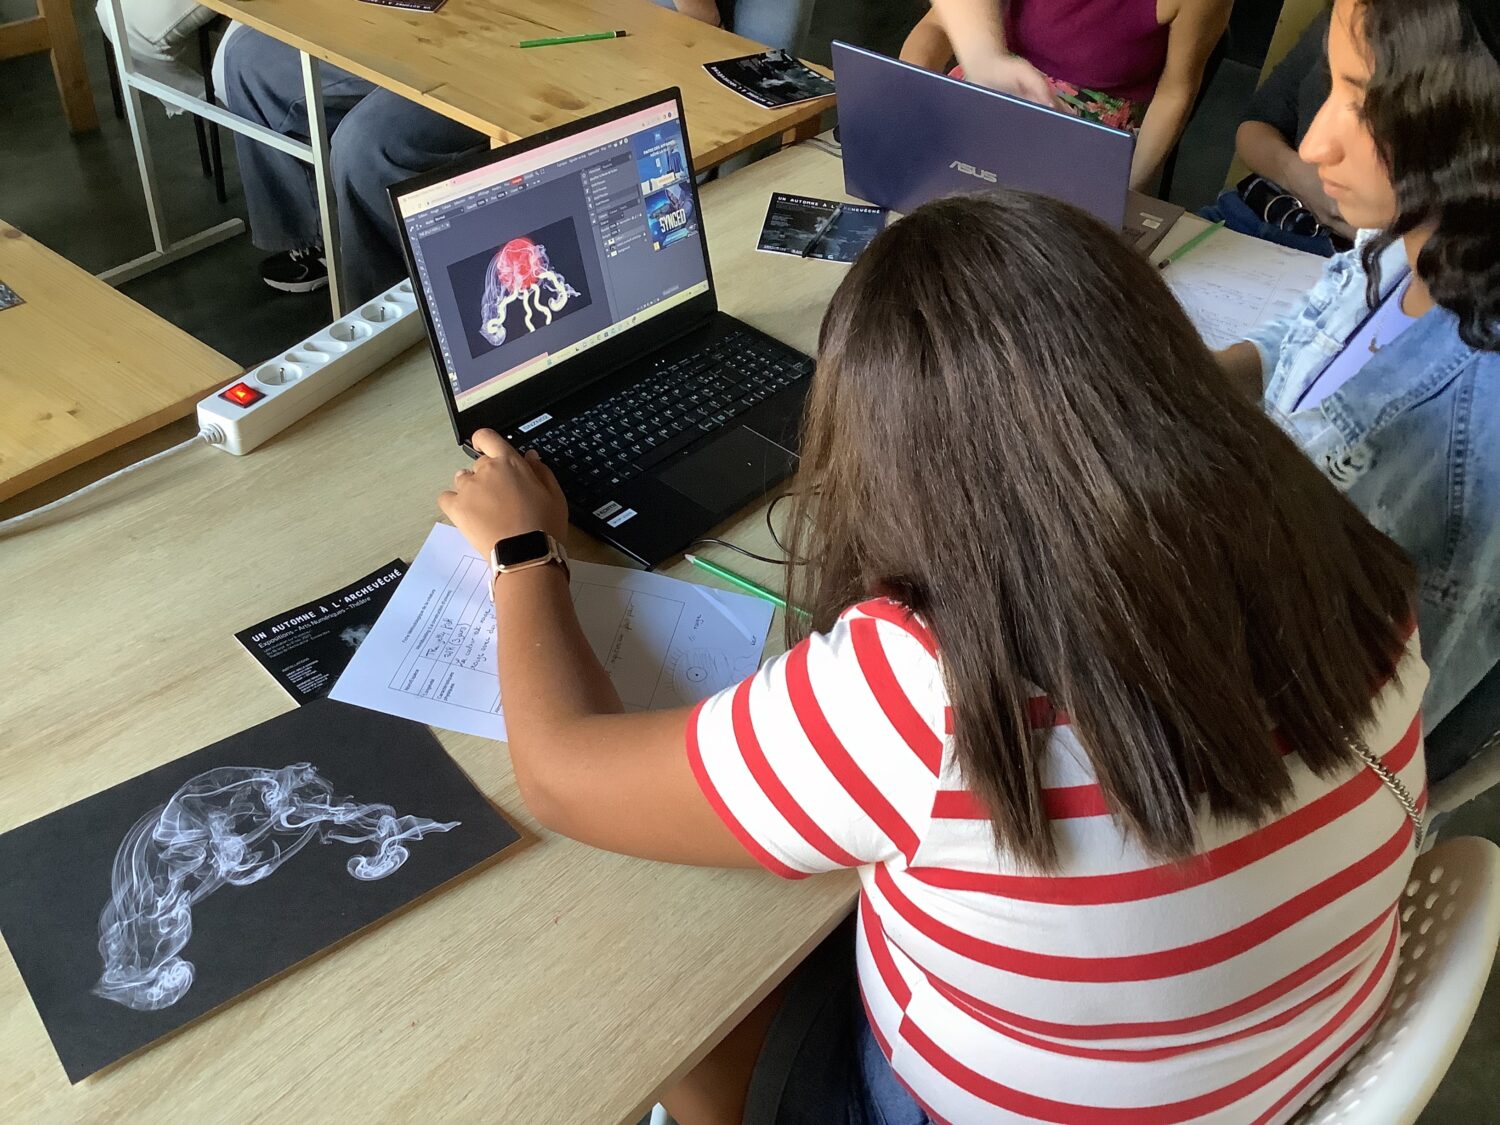 These workshops were organized with La Fondation Agir Contre l’Exclusion in order to give teenage girls confidence in their abilities to work with technological devices, to learn about the different career opportunities available and to discover the work of female digital artists. To do so, we chose to inspire them with augmented reality where they created their creatures on paper and animated them in real life.